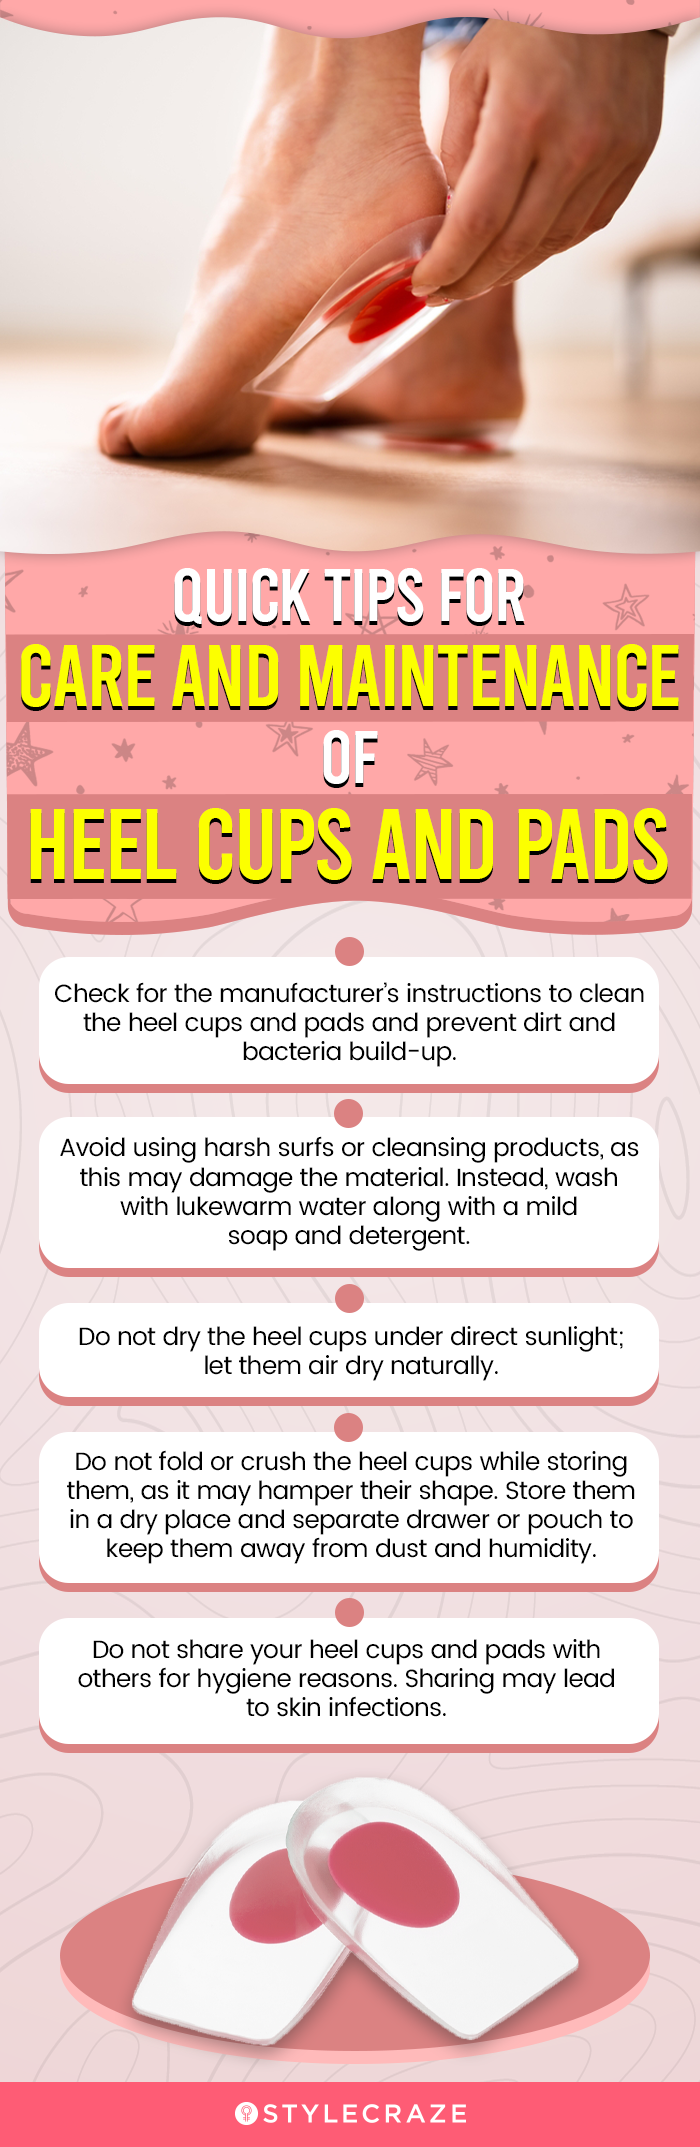 Quick Tips For Care And Maintenance Of Heel Cups And Pads (infographic)